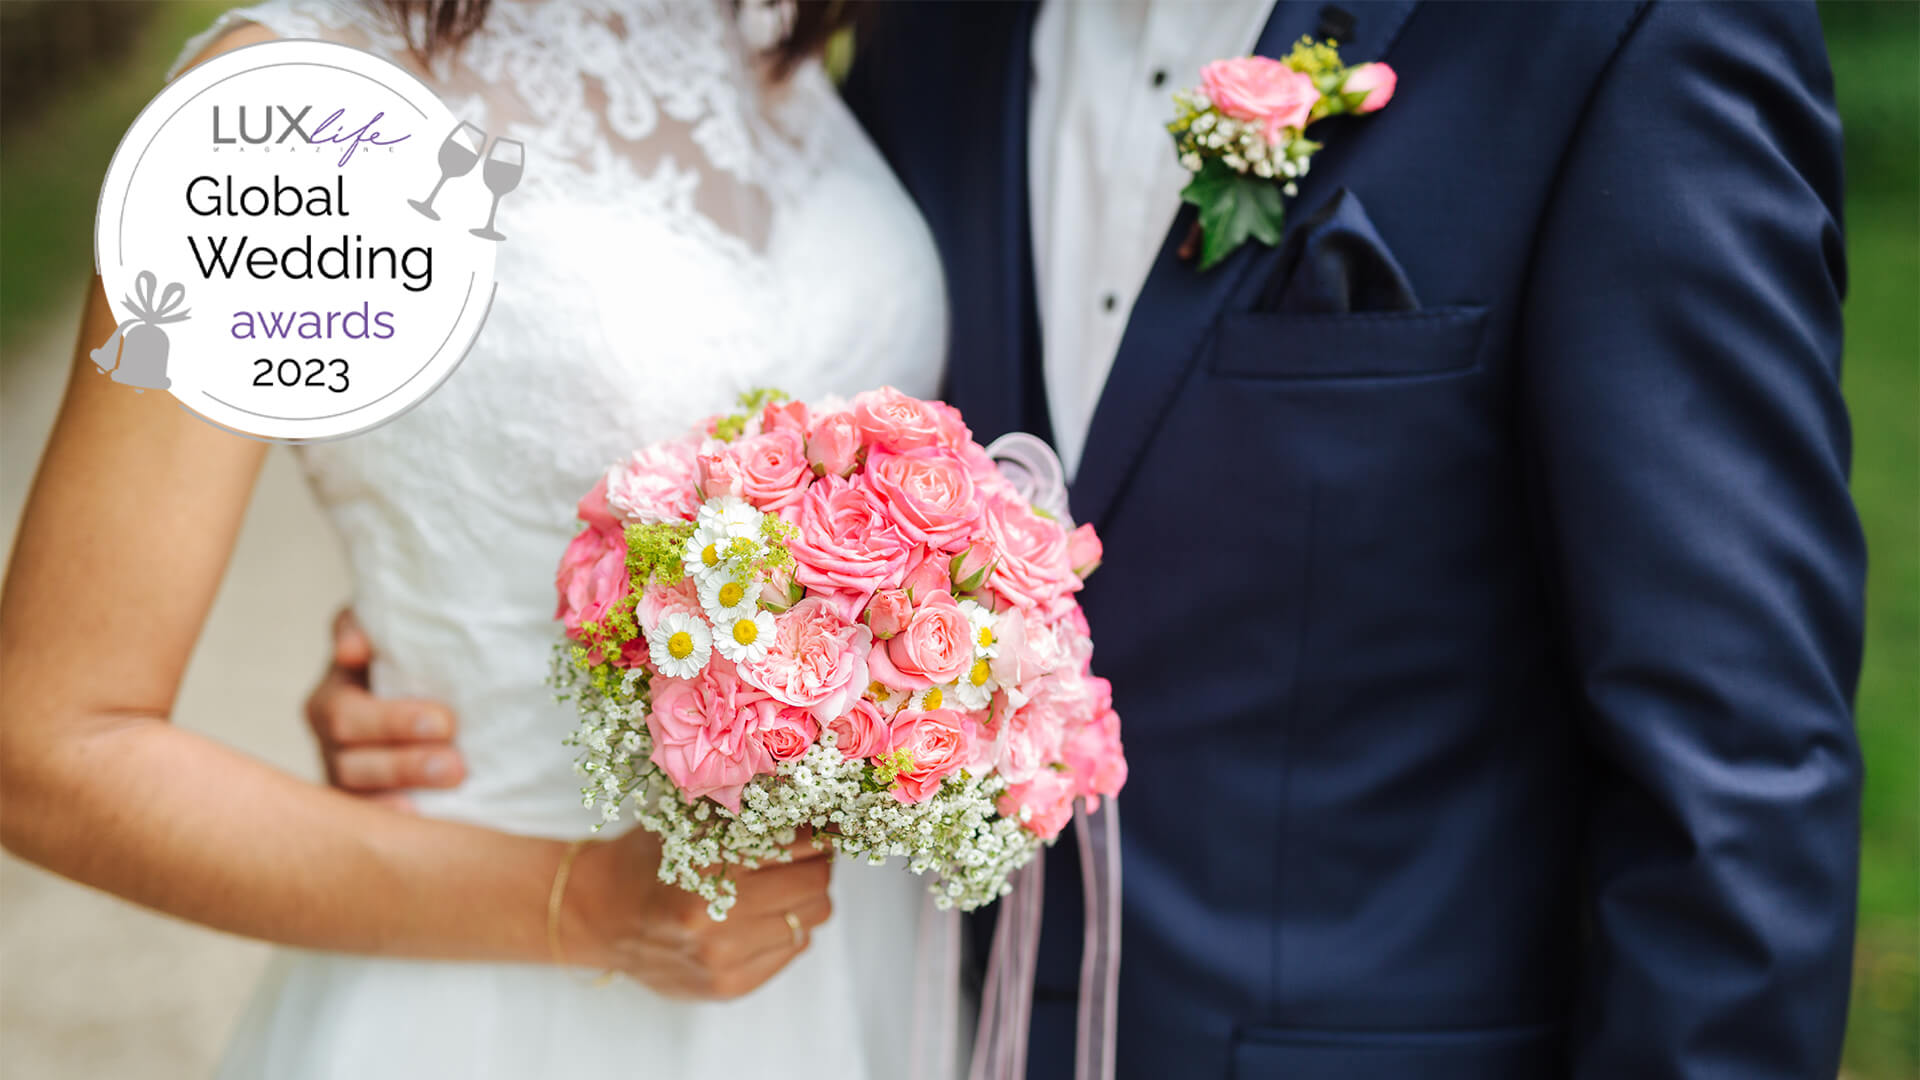 bride and groom standing together, the bride is holding a pink flower boquet